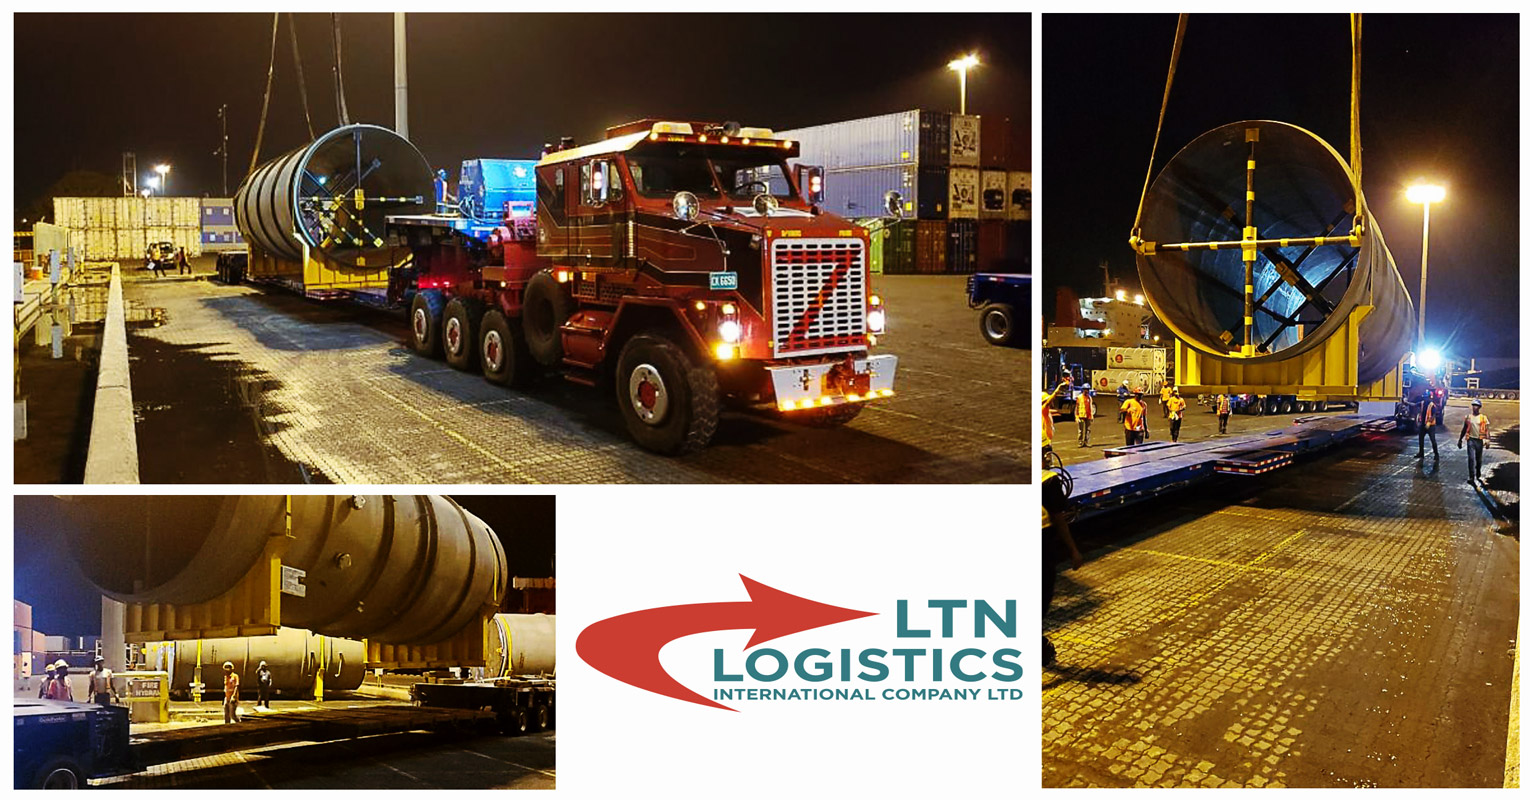 Combined Heat Power (CHP) Equipment Handled by LTN Logistics International from Ship Side a Power Plant